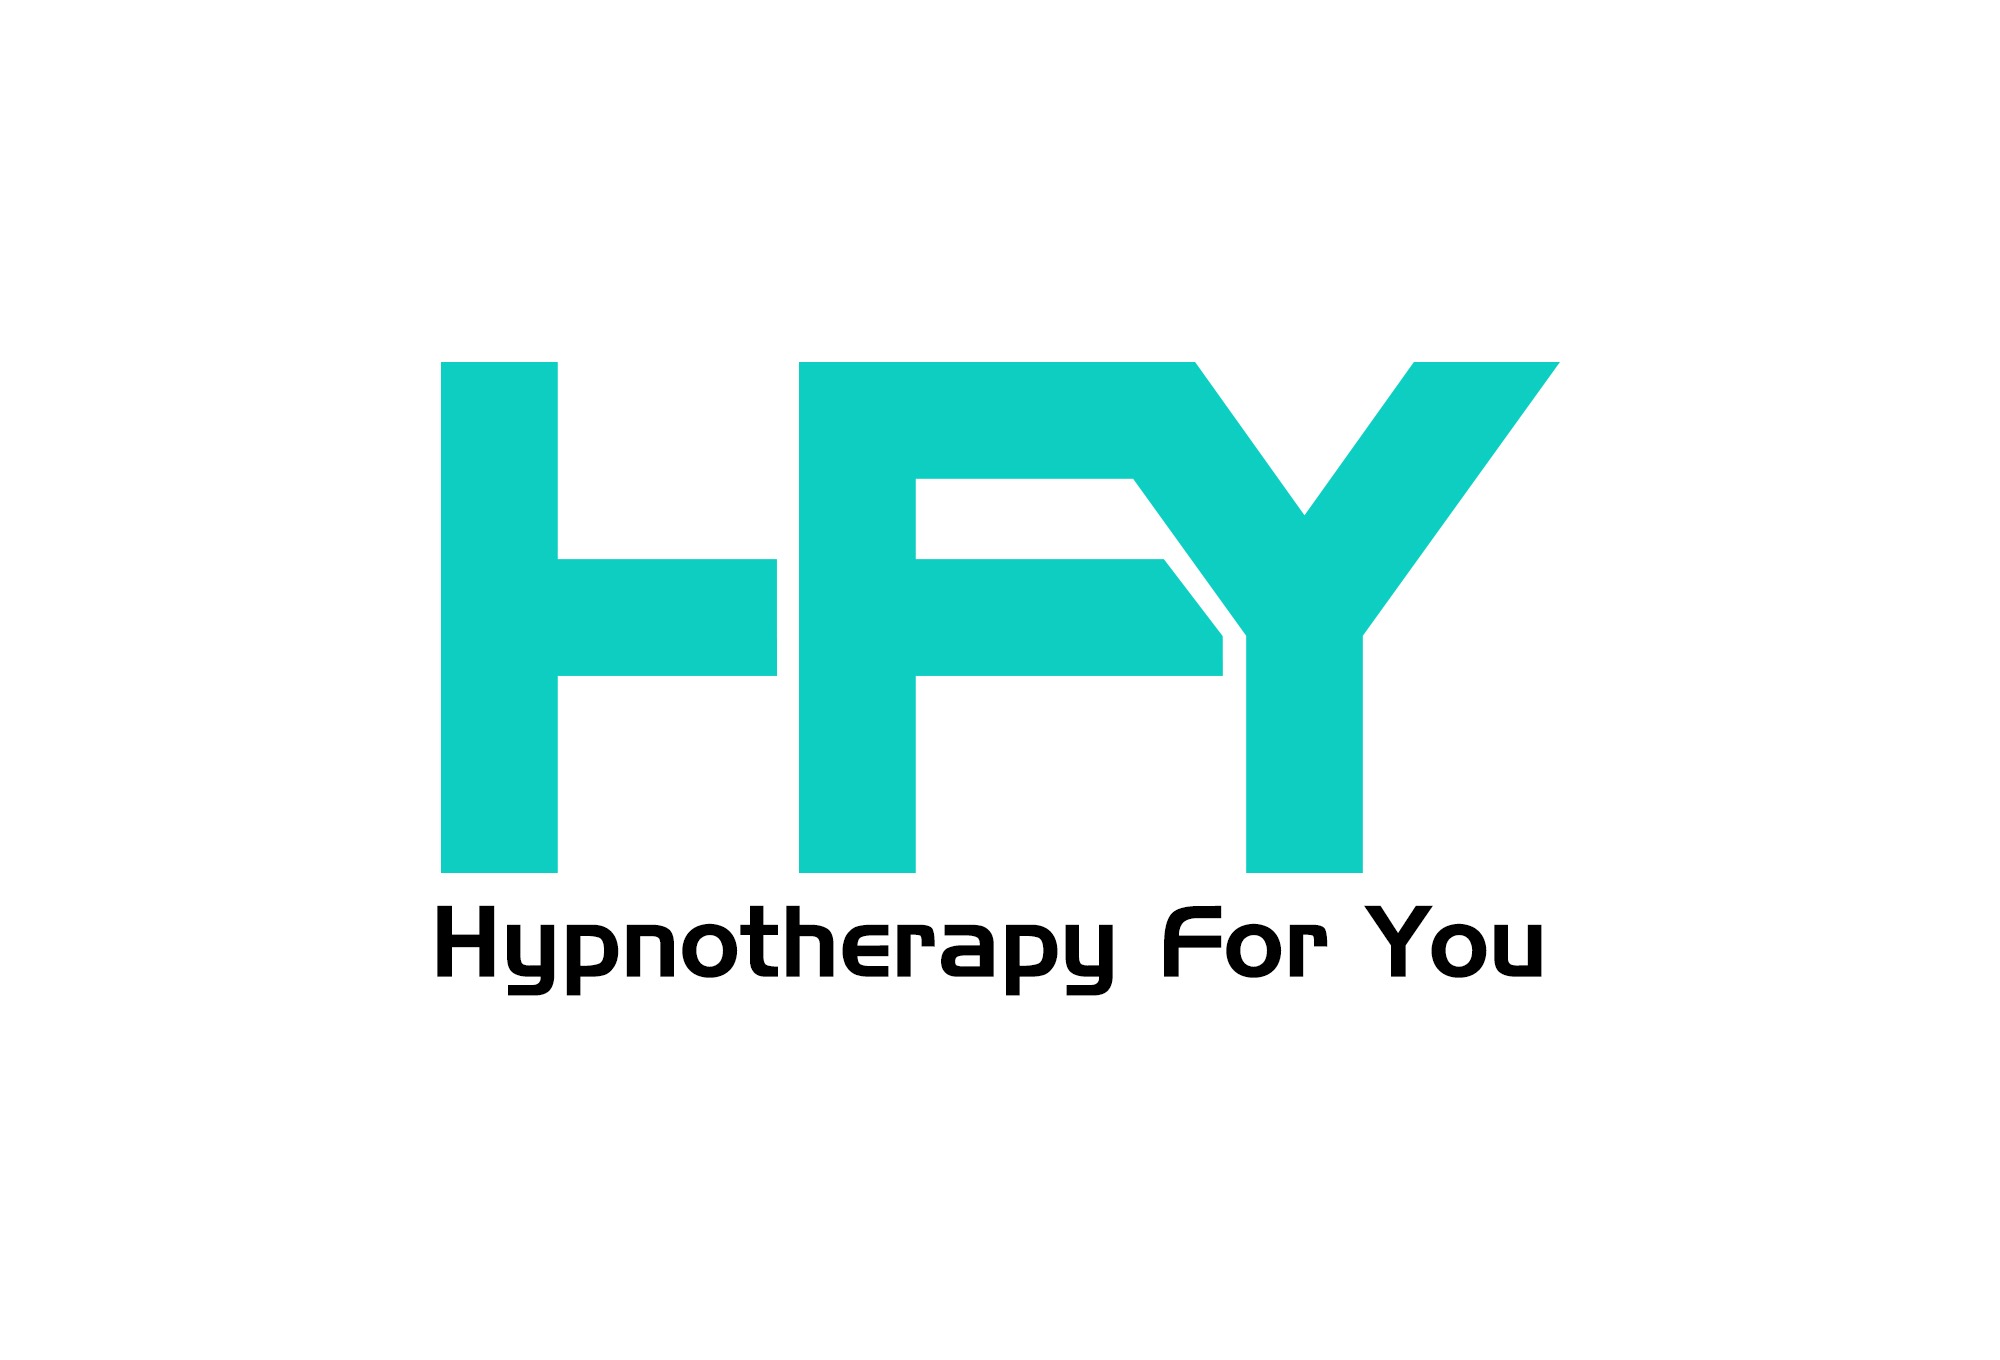 Hypnotherapy For You